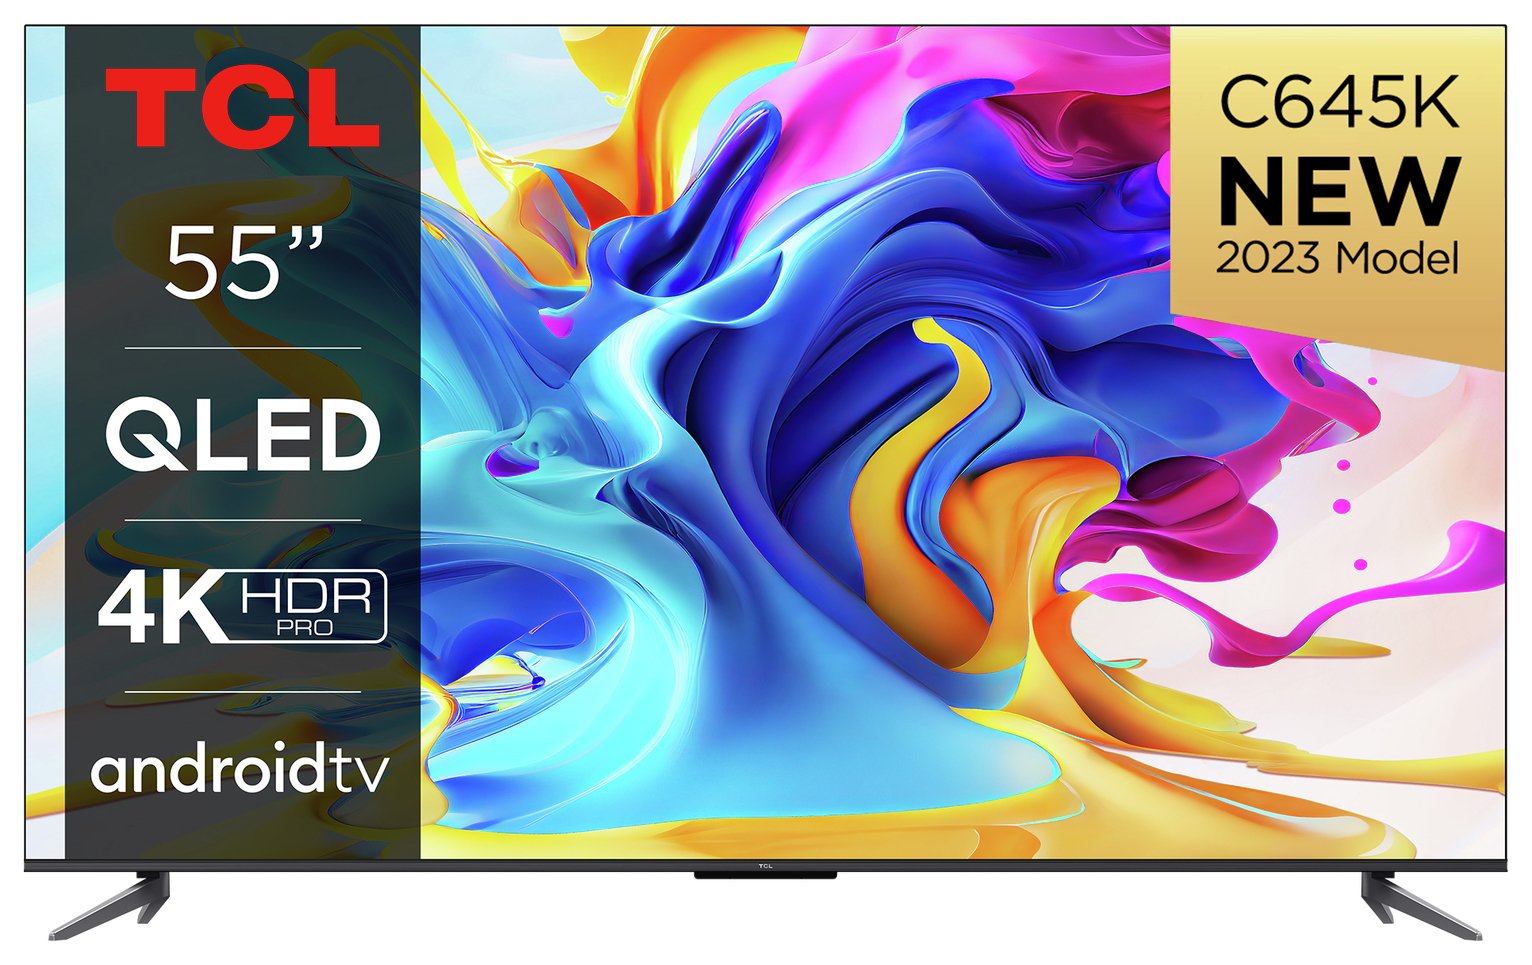 TCL 55 Inch 55C645K Smart 4K Ultra HD HDR QLED Android TV